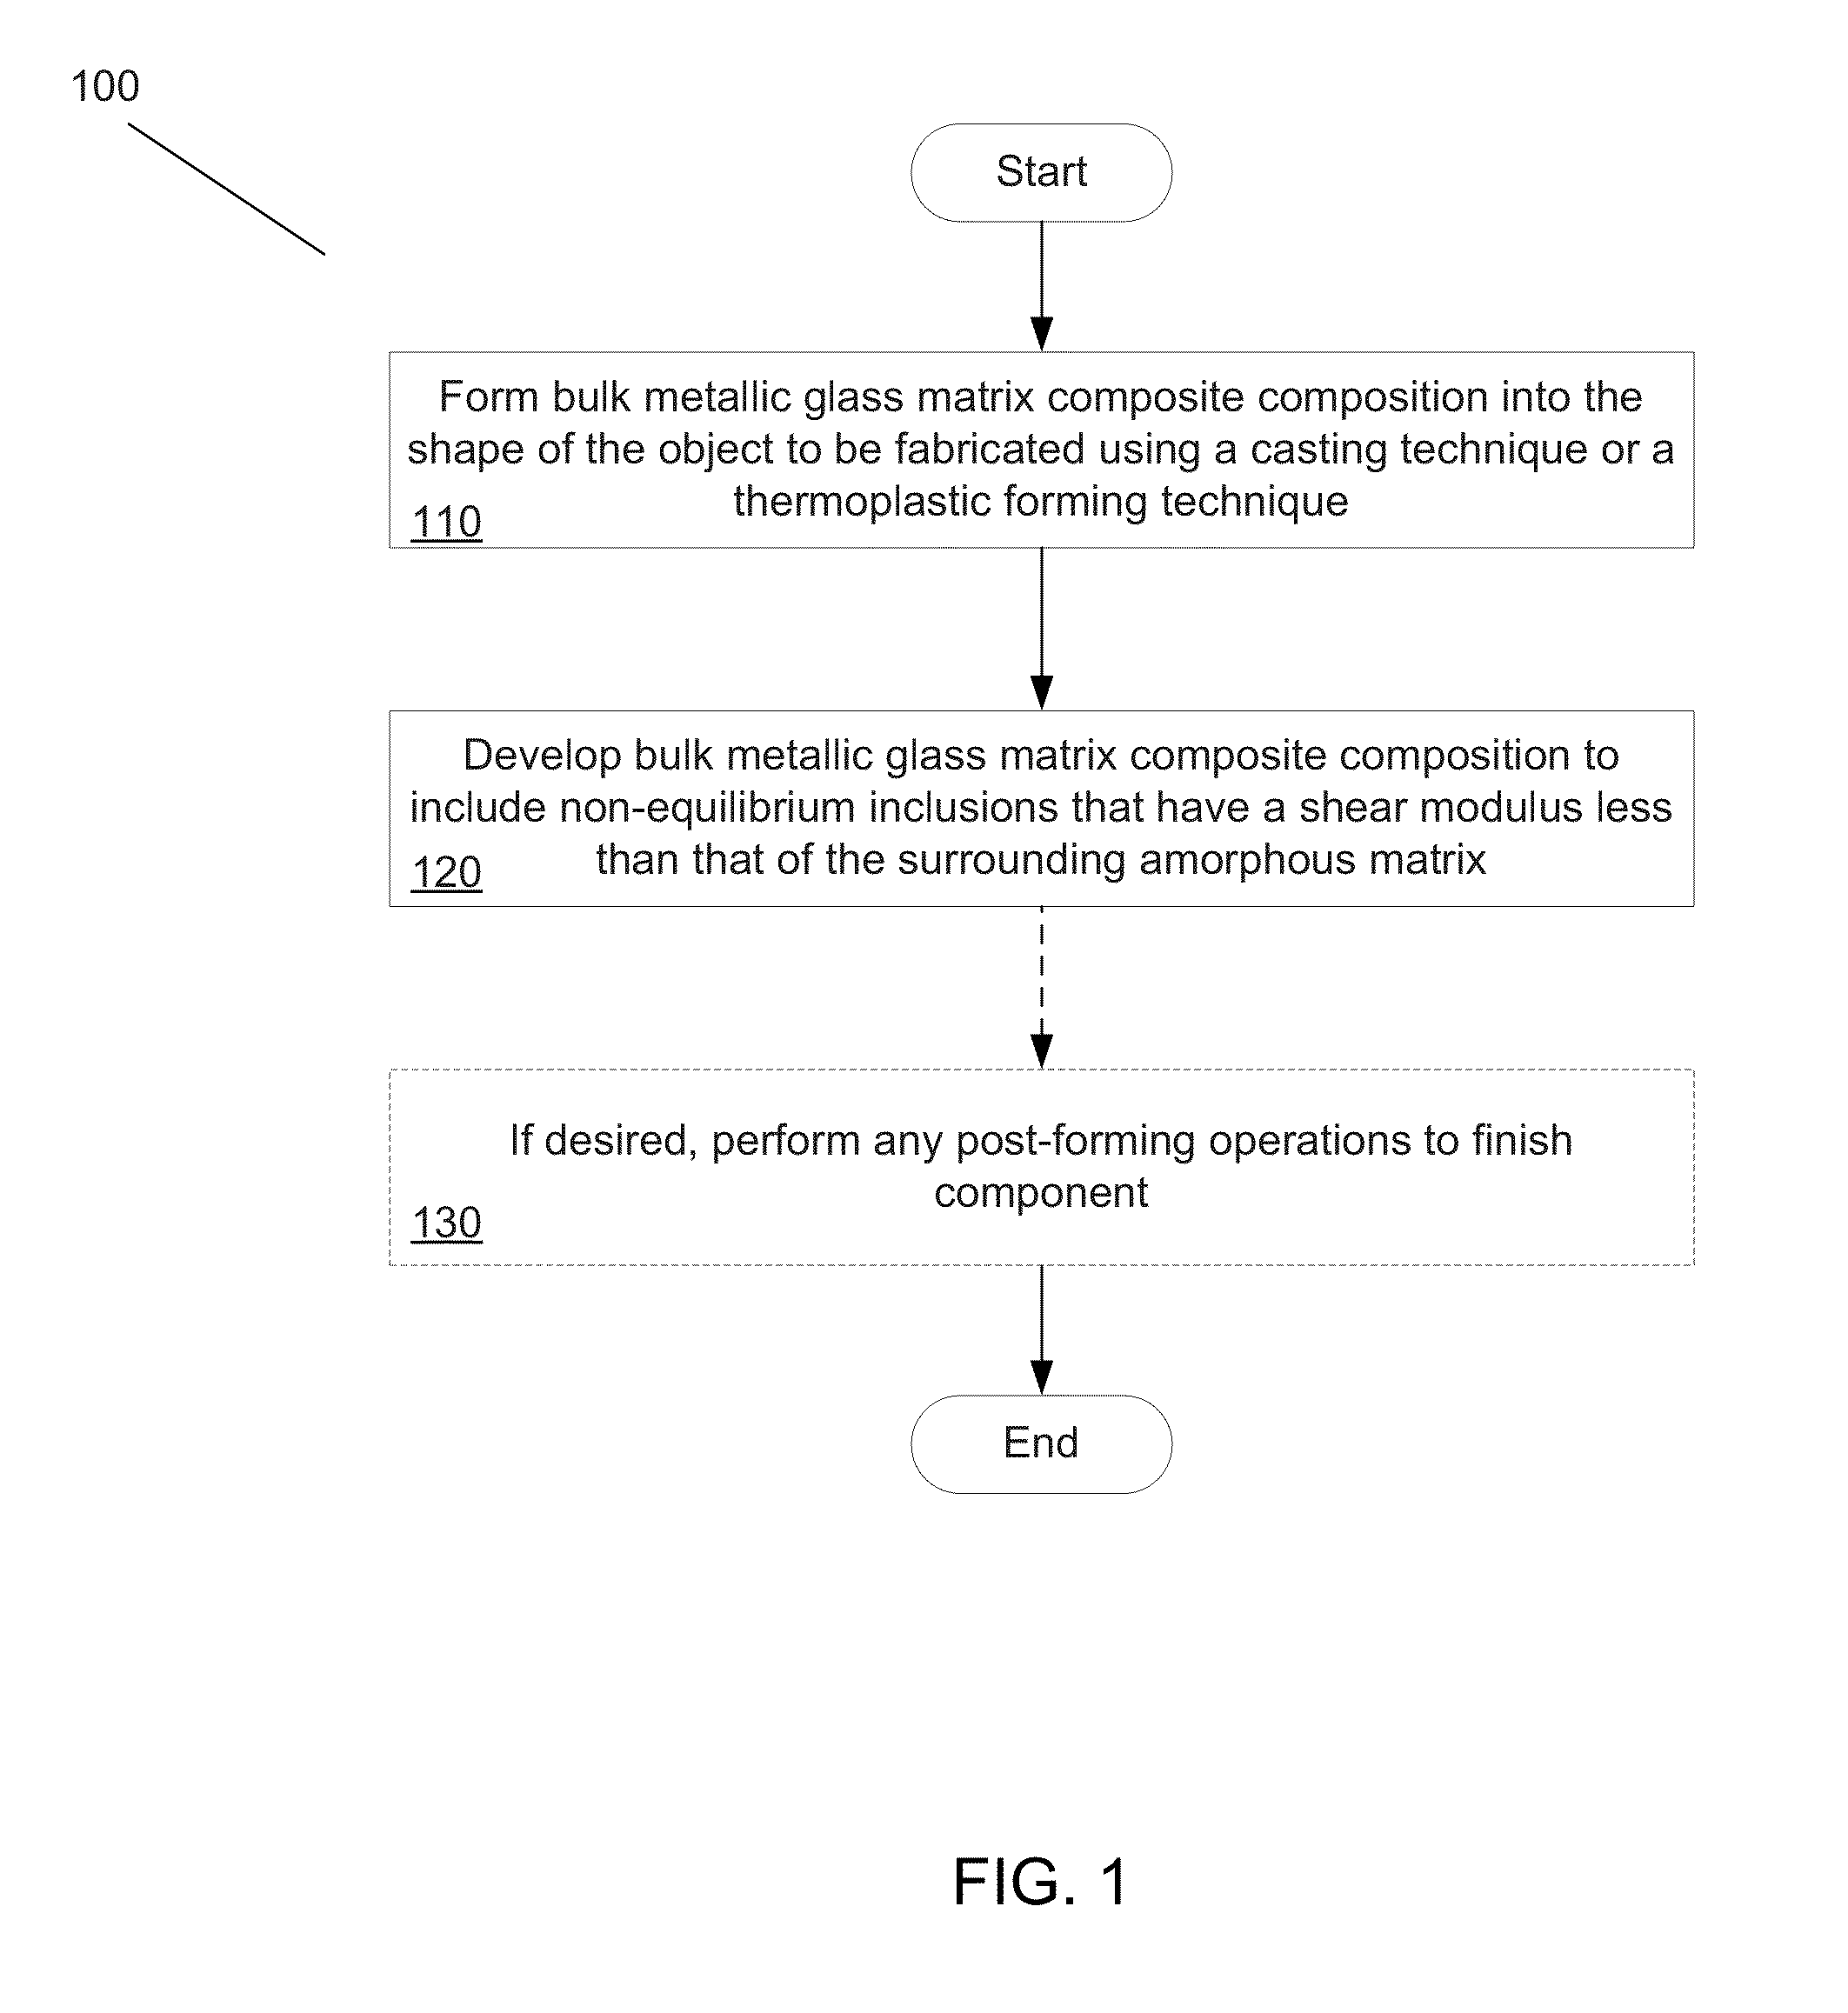 Systems and methods for fabricating objects from bulk metallic glass matrix composites using primary crystallization